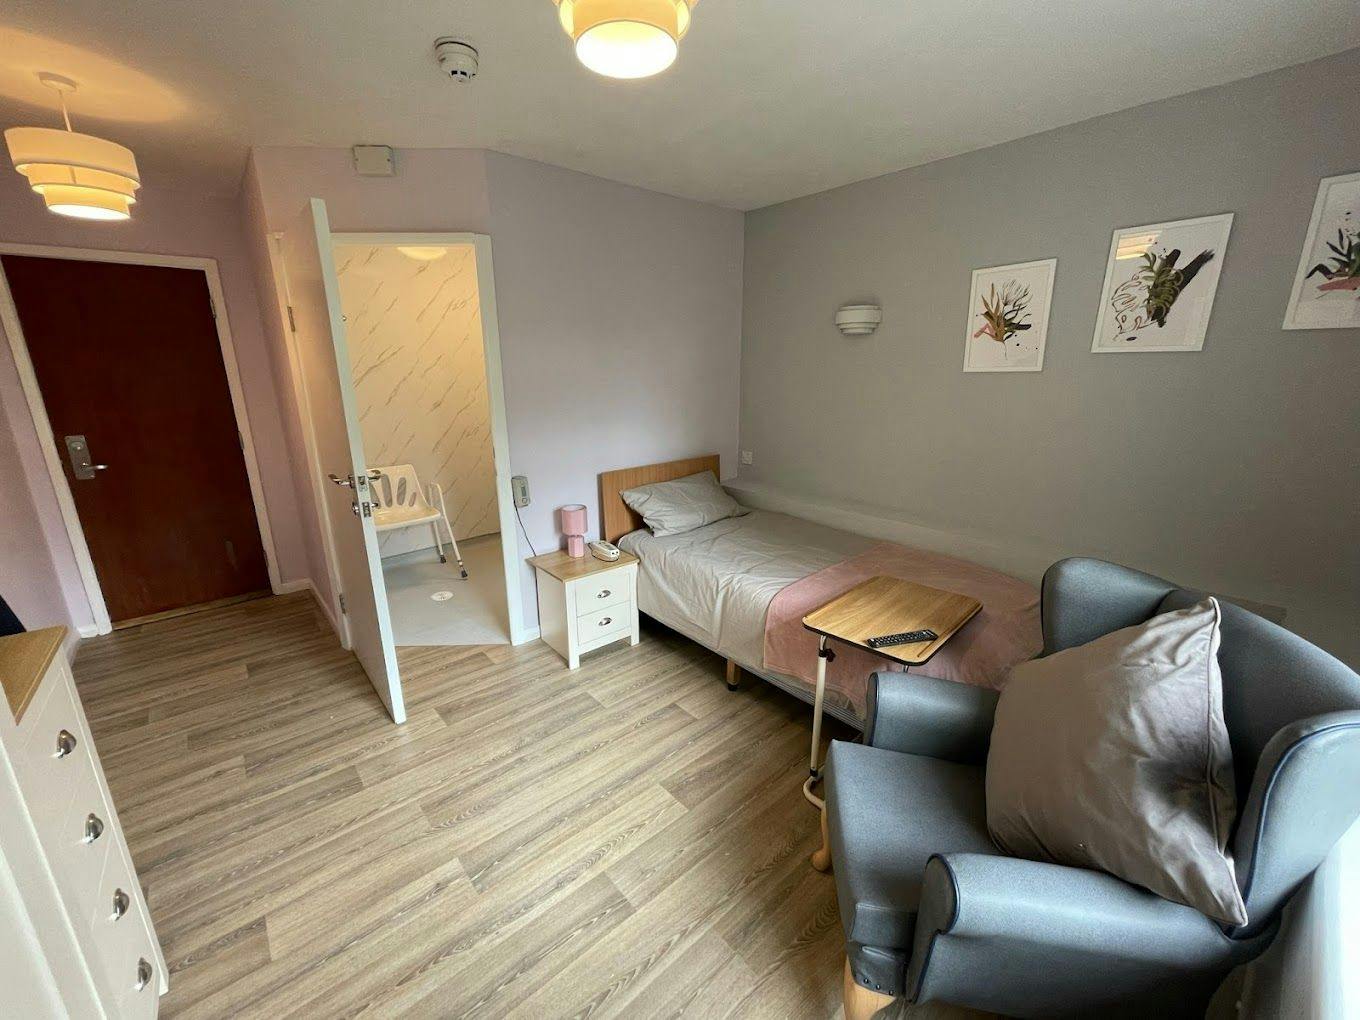 Bedroom at Florence House Care Home in Newcastle-under-Lyme, Staffordshire